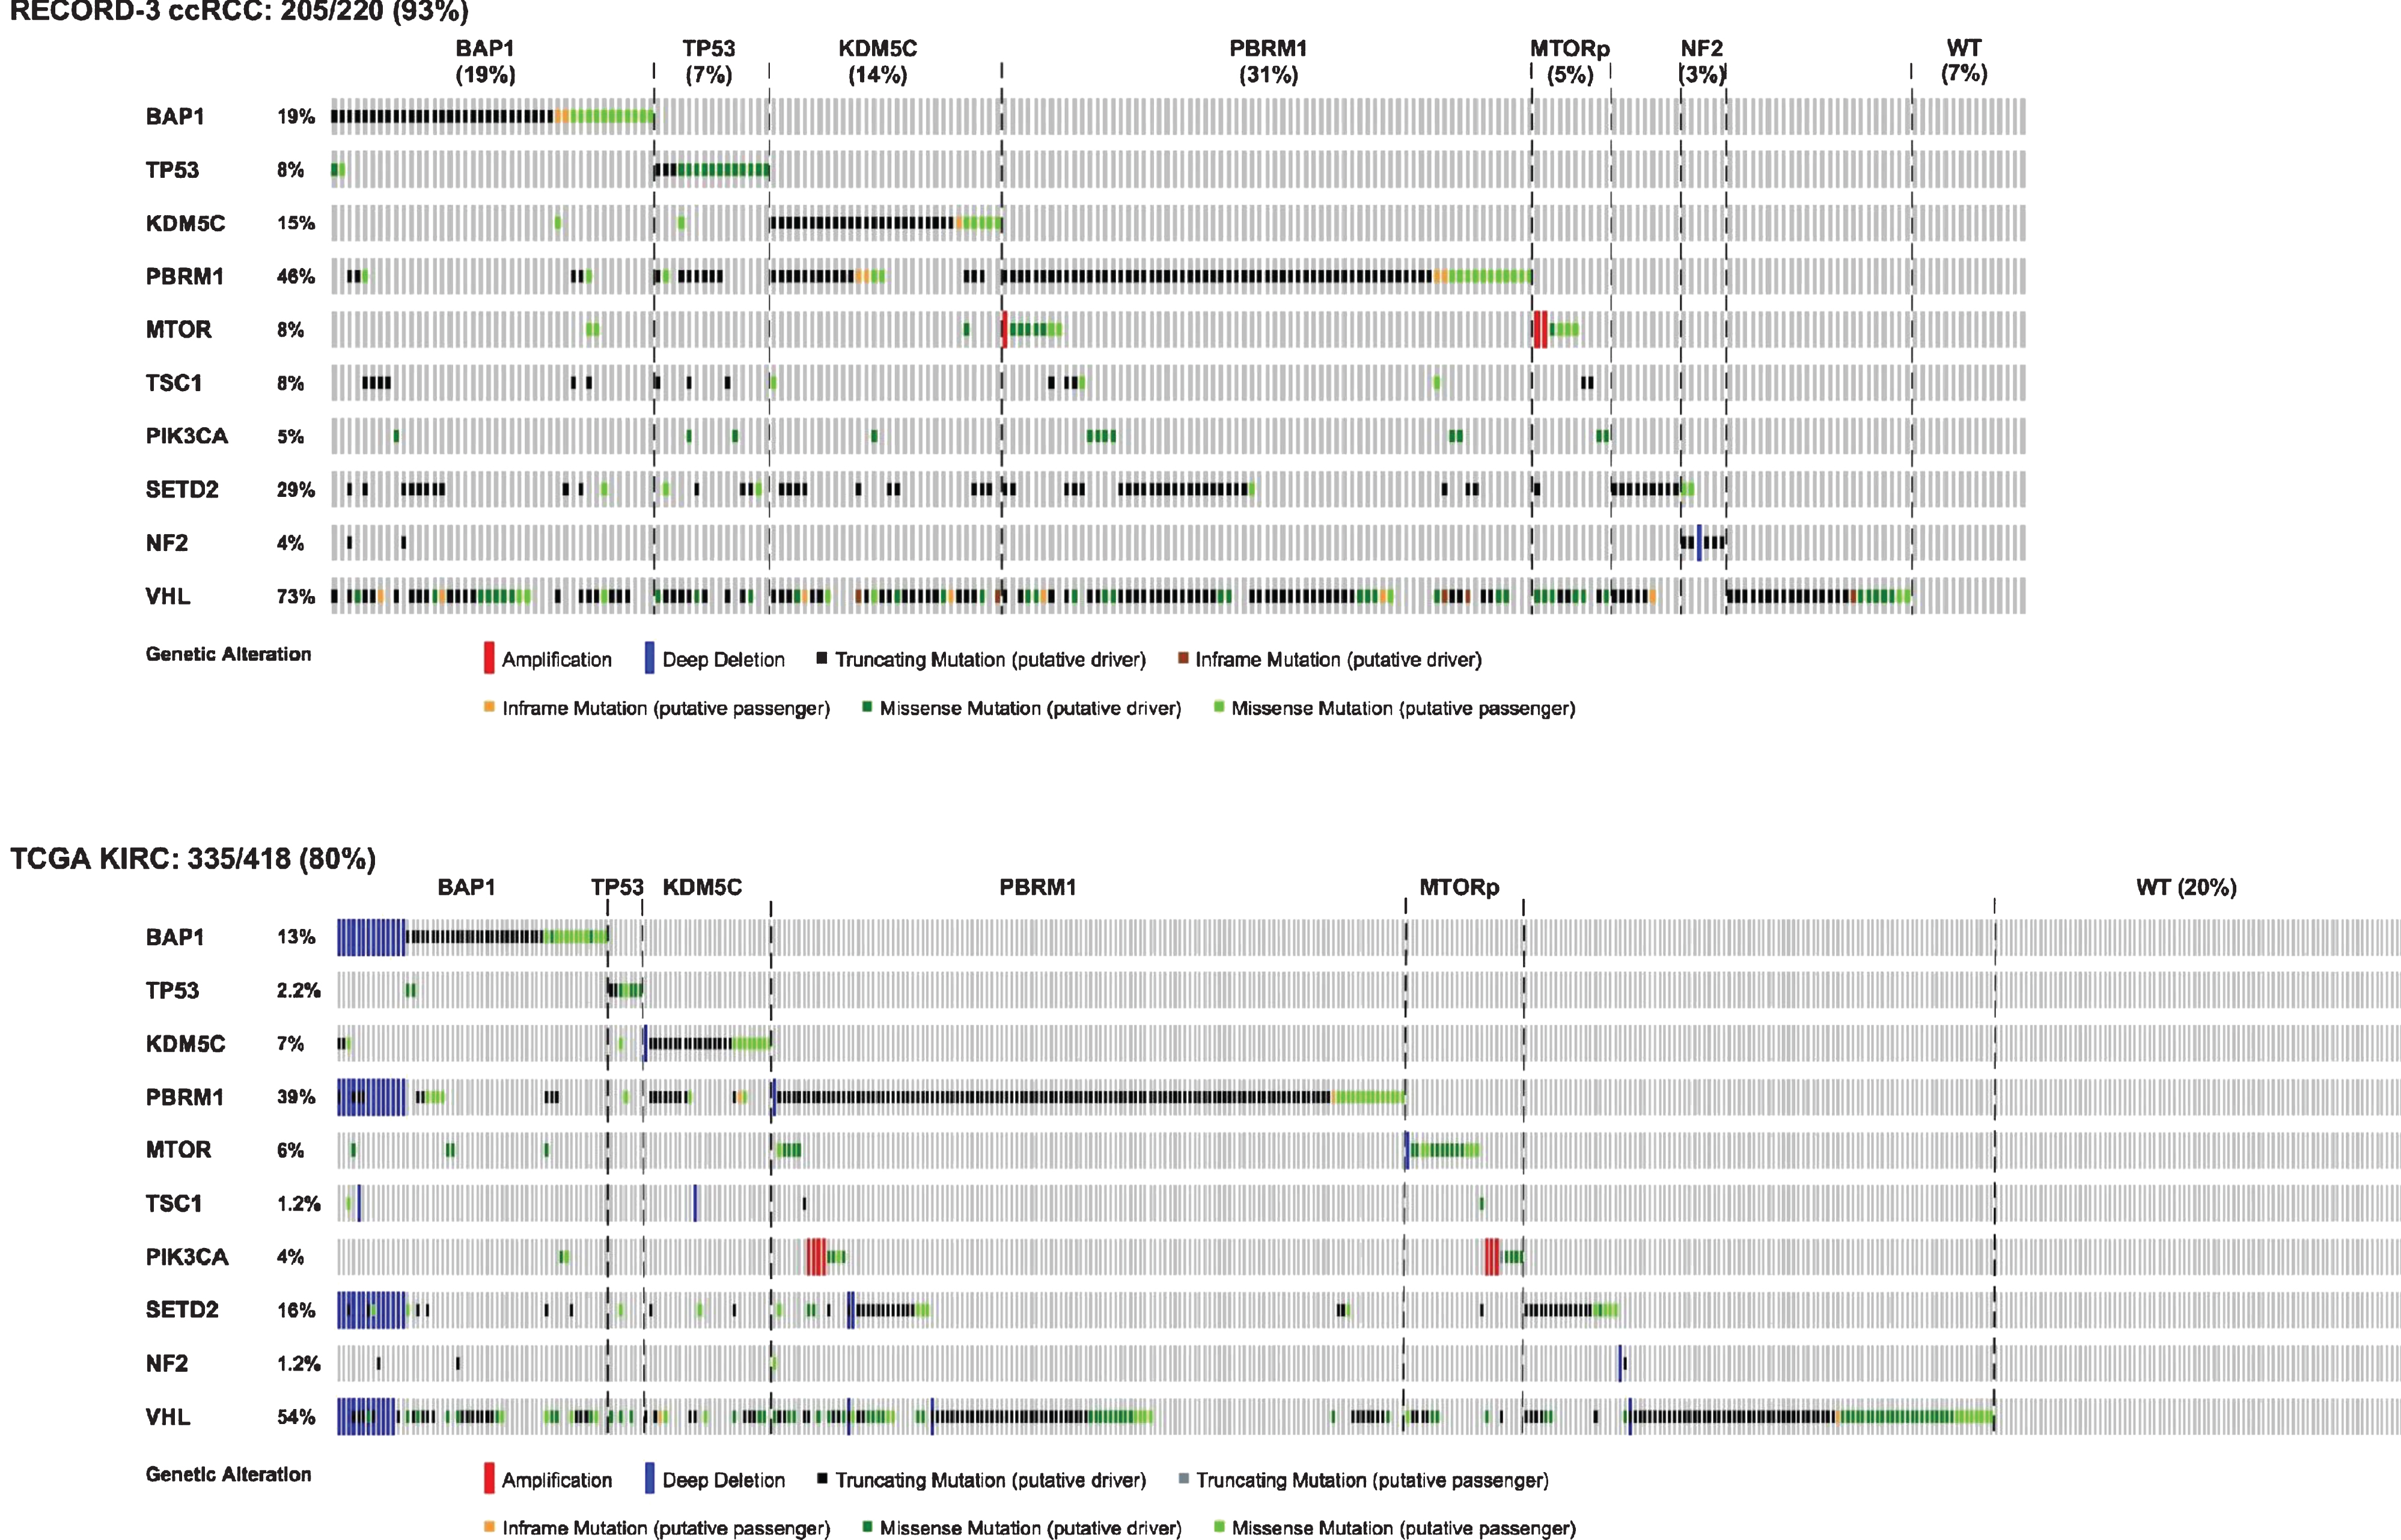 Somatic mutation landscape of ccRCC based on 10 genes that are selected for either prevalent mutations or shown prognostic/therapeutic significances. Top panel represents 220 metastatic ccRCC patients in the reported NGS cohort of RECORD3 [25], and bottom panel represents 418 ccRCC patients of all stages in the reported TCGA KIRC cohort [3]. MTORp denotes MTORC1 pathway.